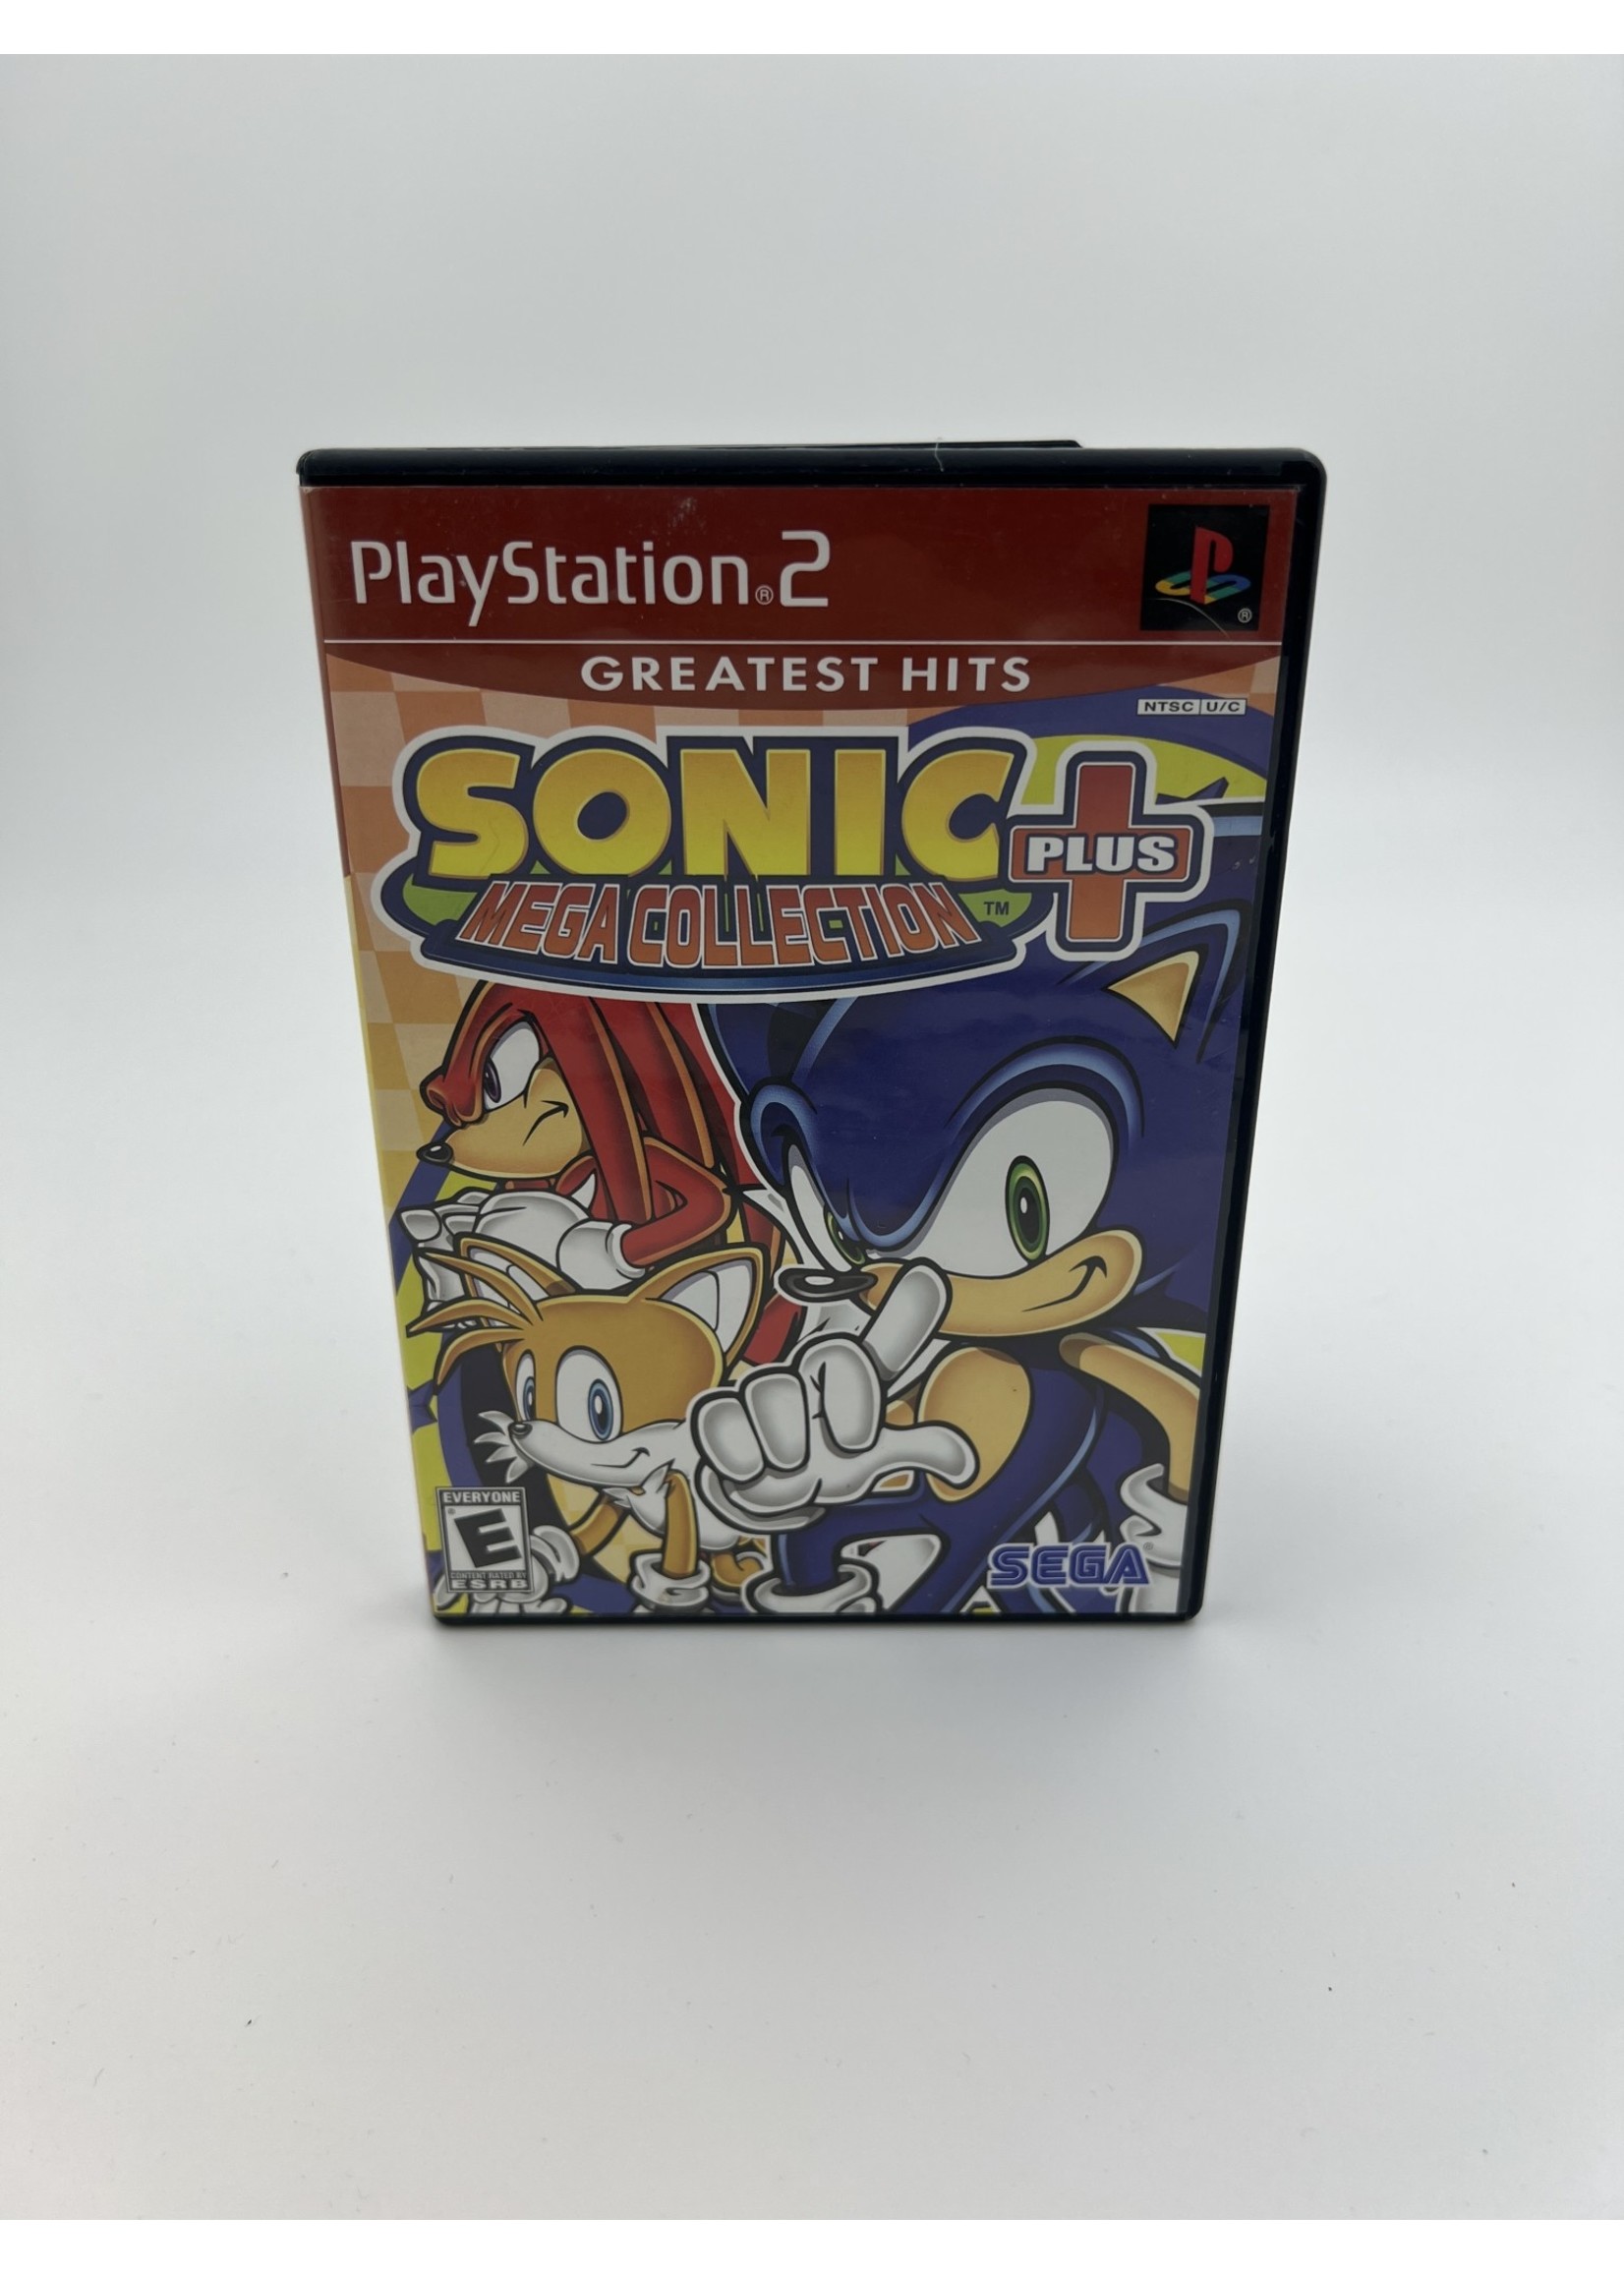 Sony Sonic Mega Collection Plus PS2